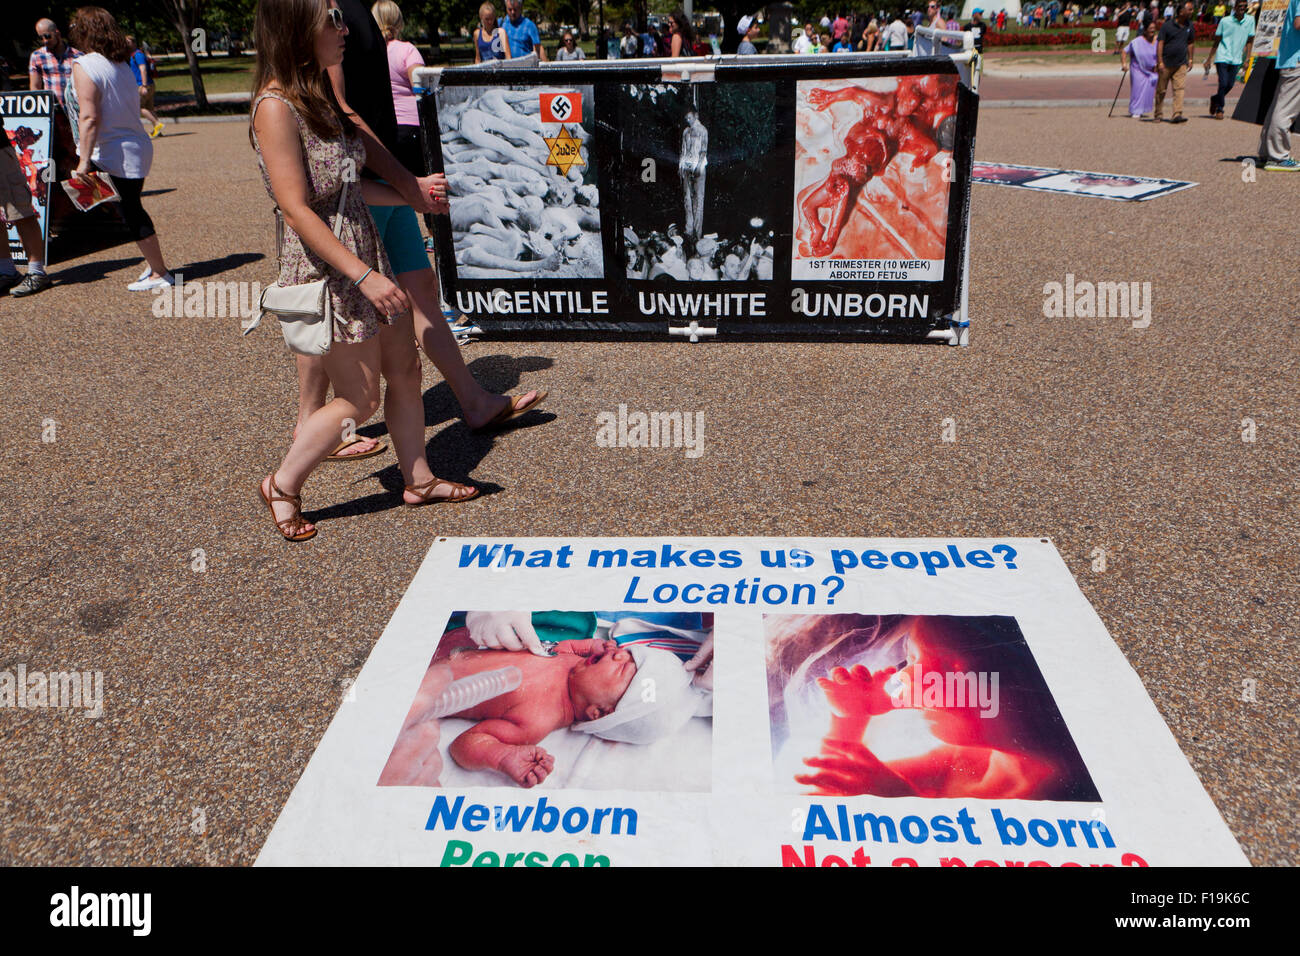 Pro-Life message posters displayed in front of The White House - Washington, DC USA Stock Photo